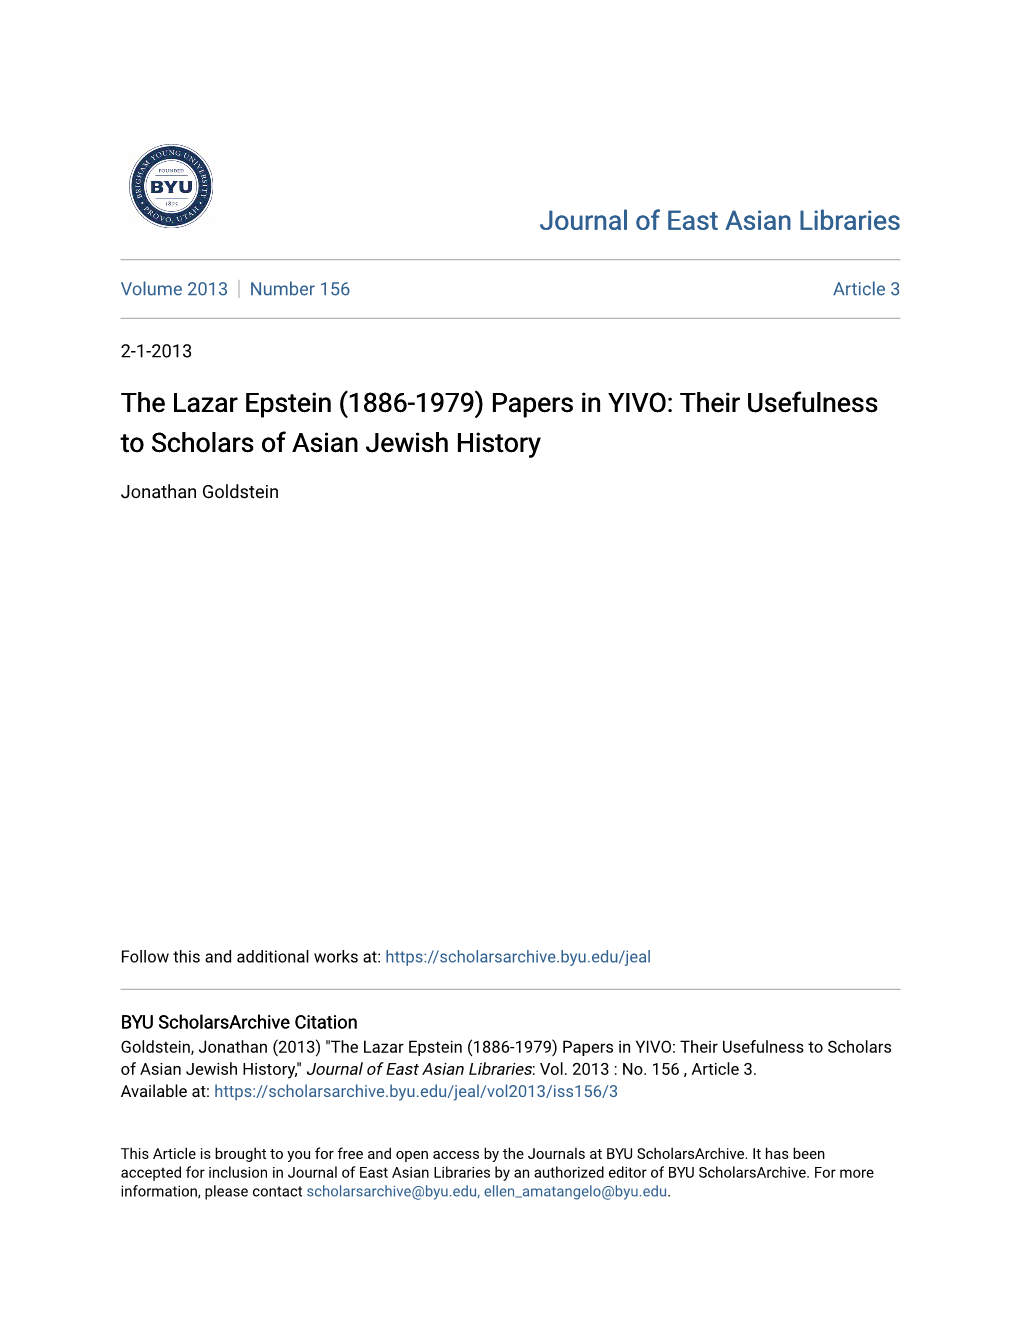 The Lazar Epstein (1886-1979) Papers in YIVO: Their Usefulness to Scholars of Asian Jewish History